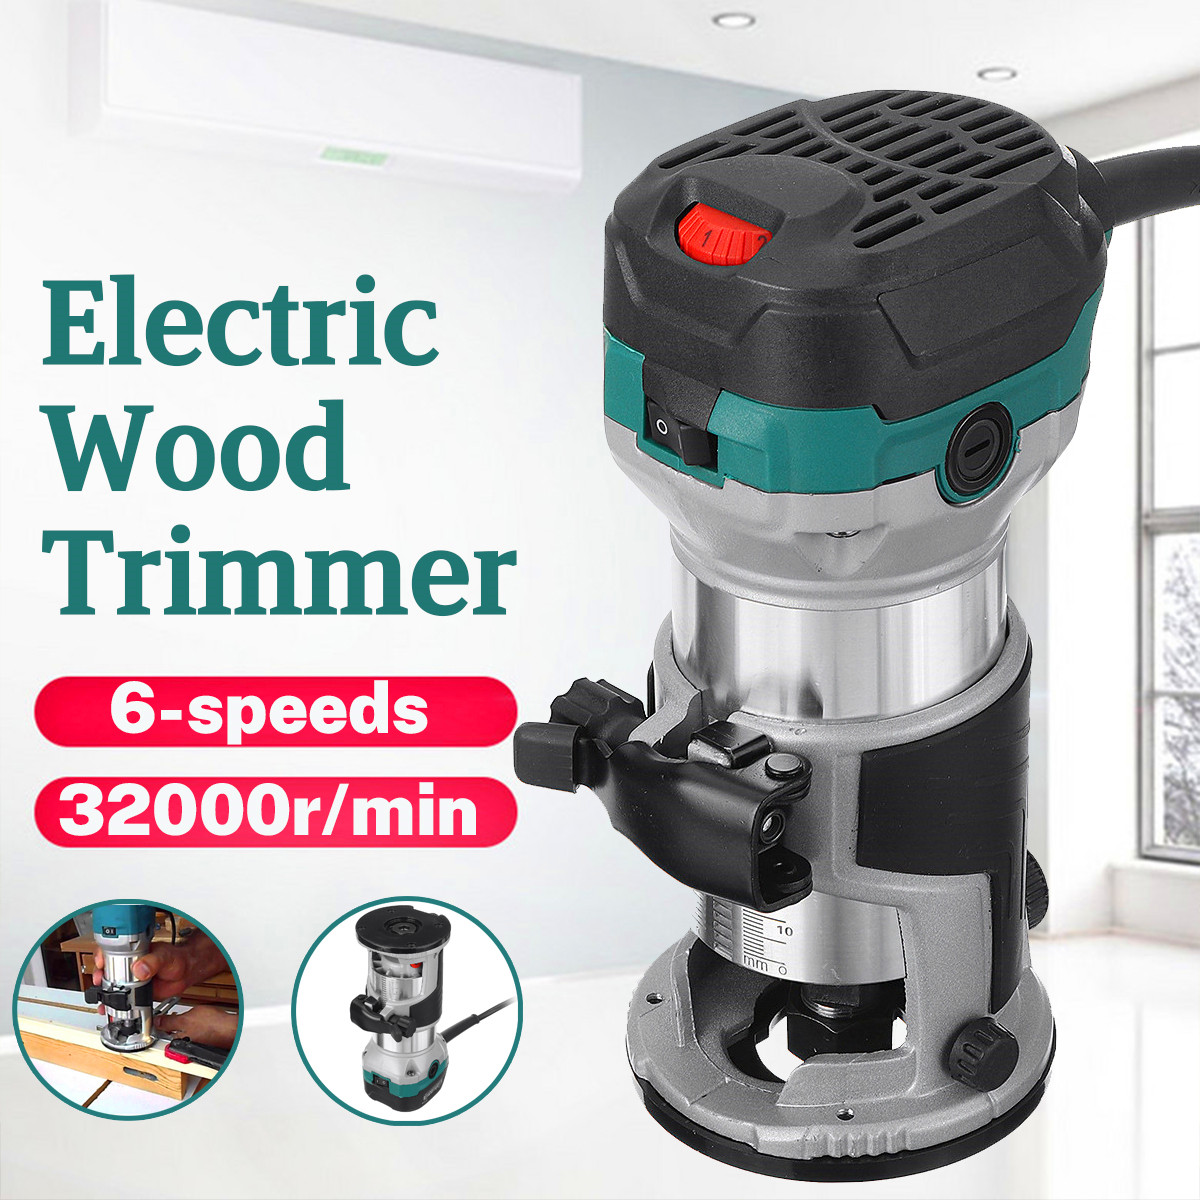 220V-710W-Electric-Wood-Trimmer-6-Speed-Wood-Chamfering-Grooving-Curve-Cutting-Woodworking-Planing-1875949-2